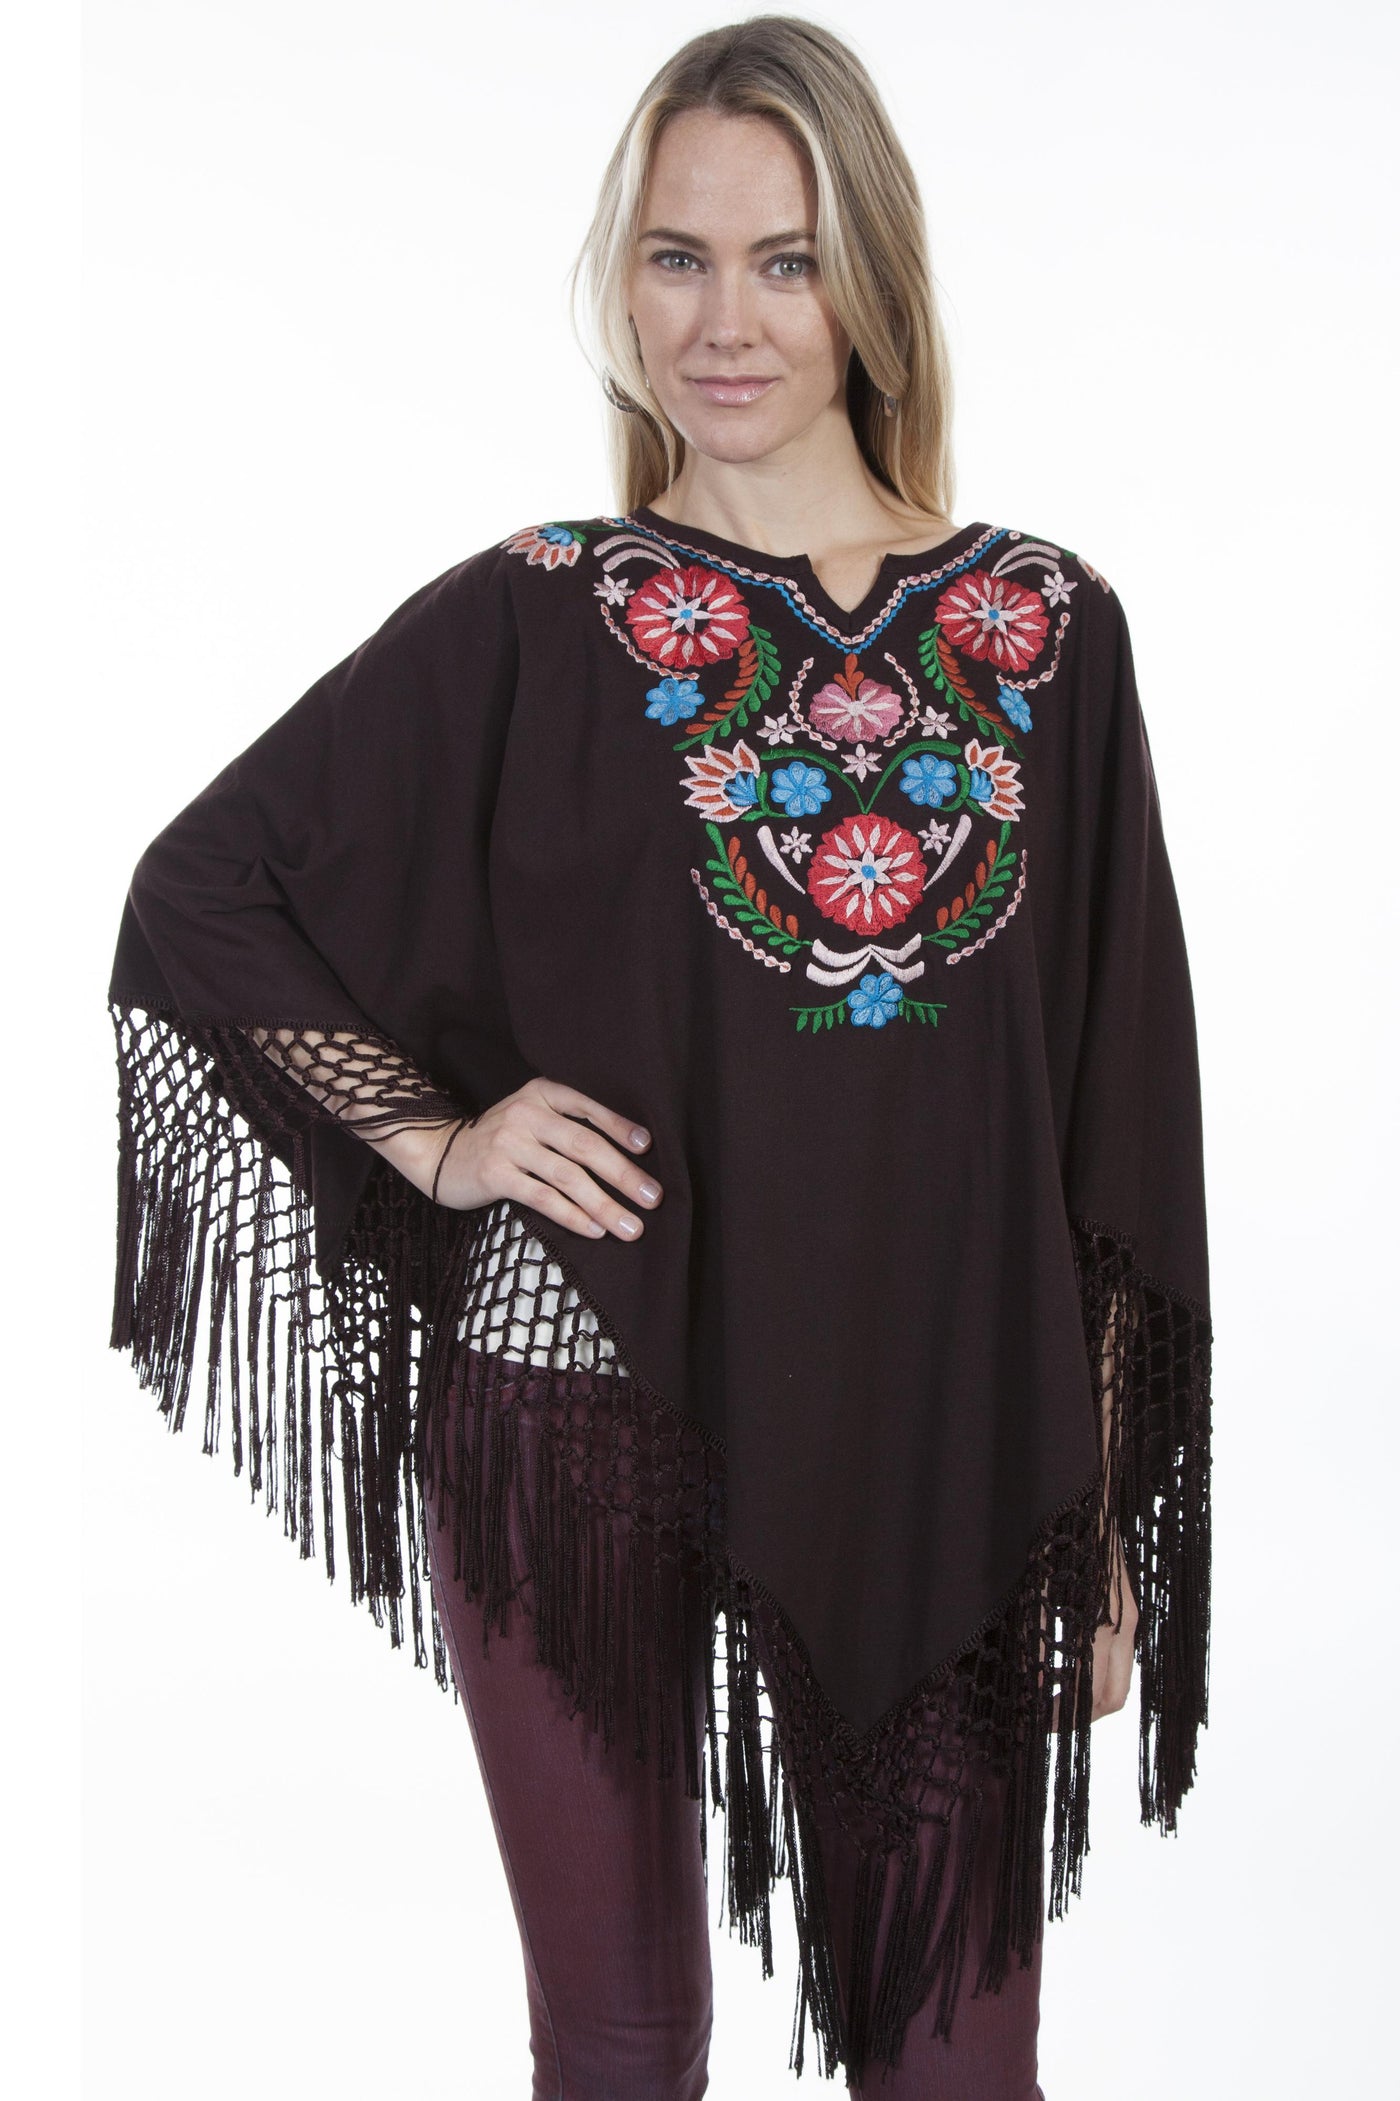 Bohemian Floral Embroidered Poncho in Chocolate - SOLD OUT